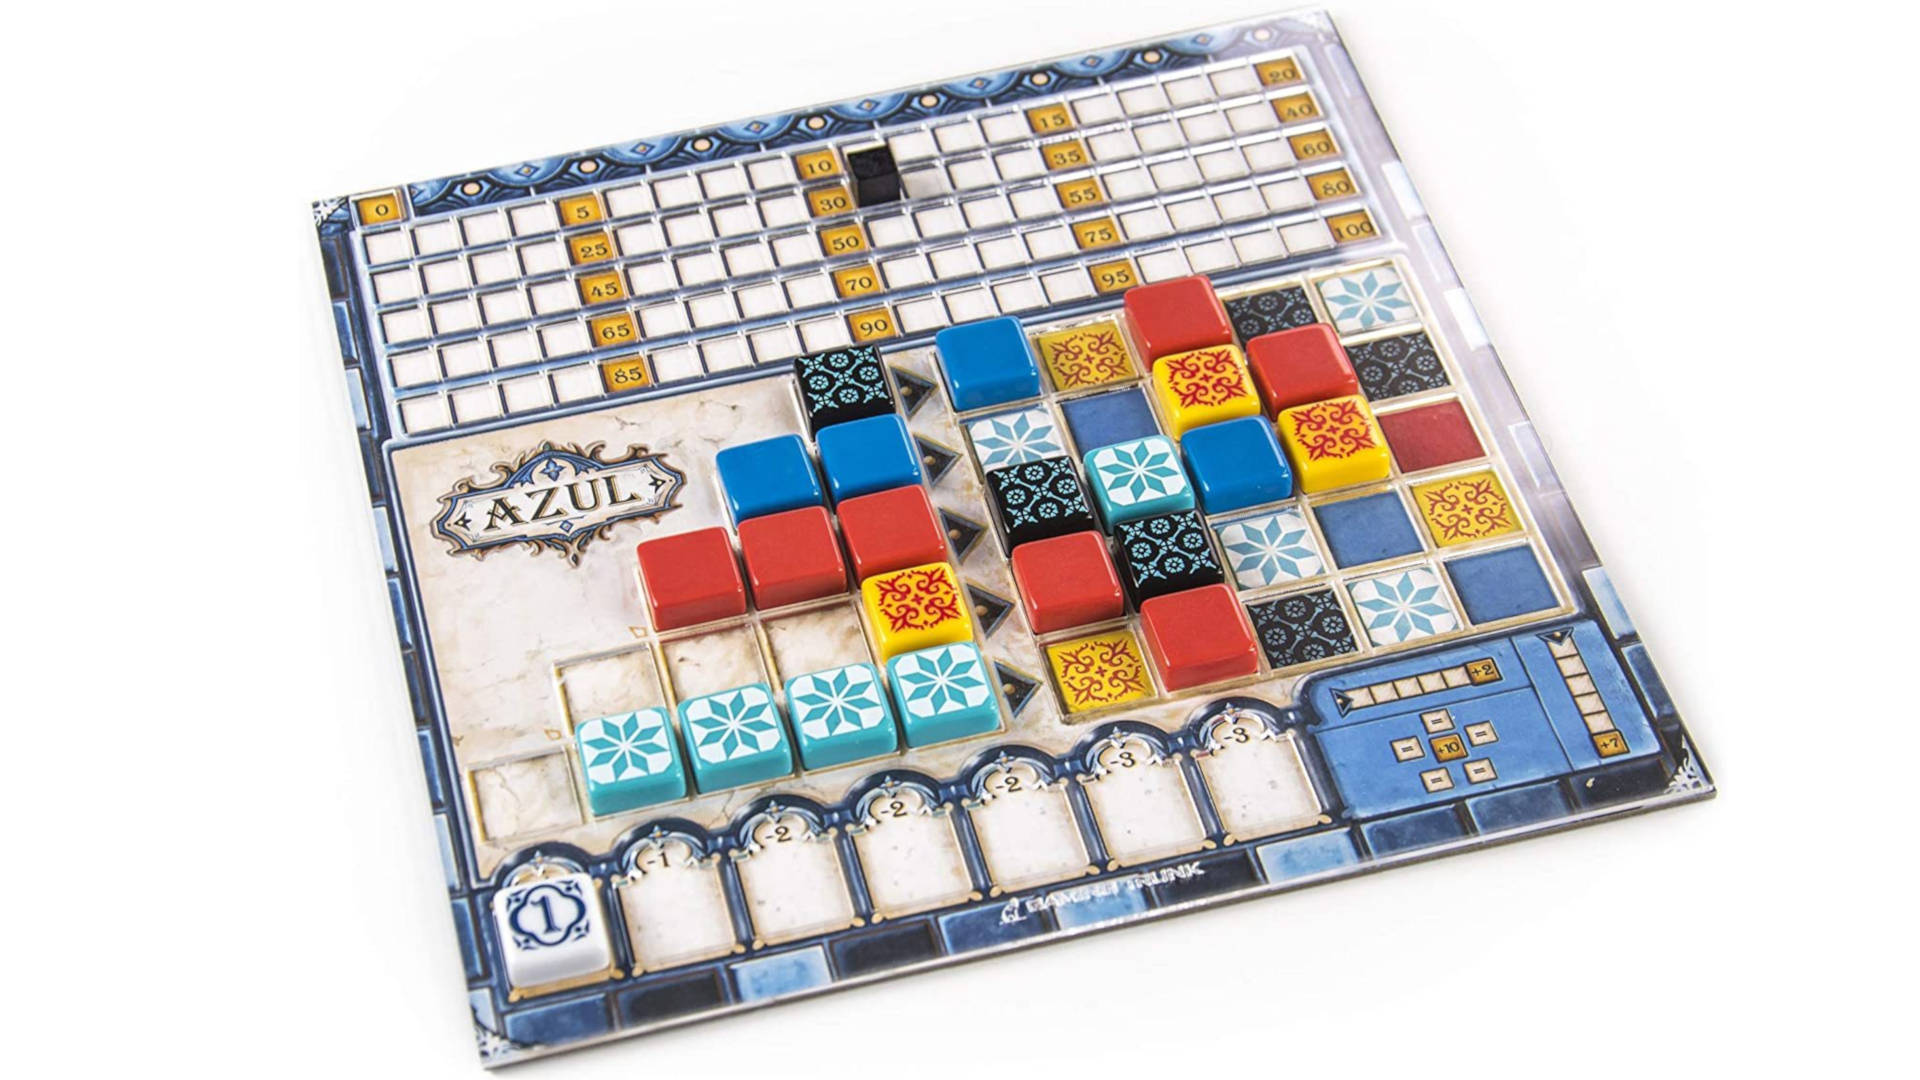 Board game types - Azul board and tiles